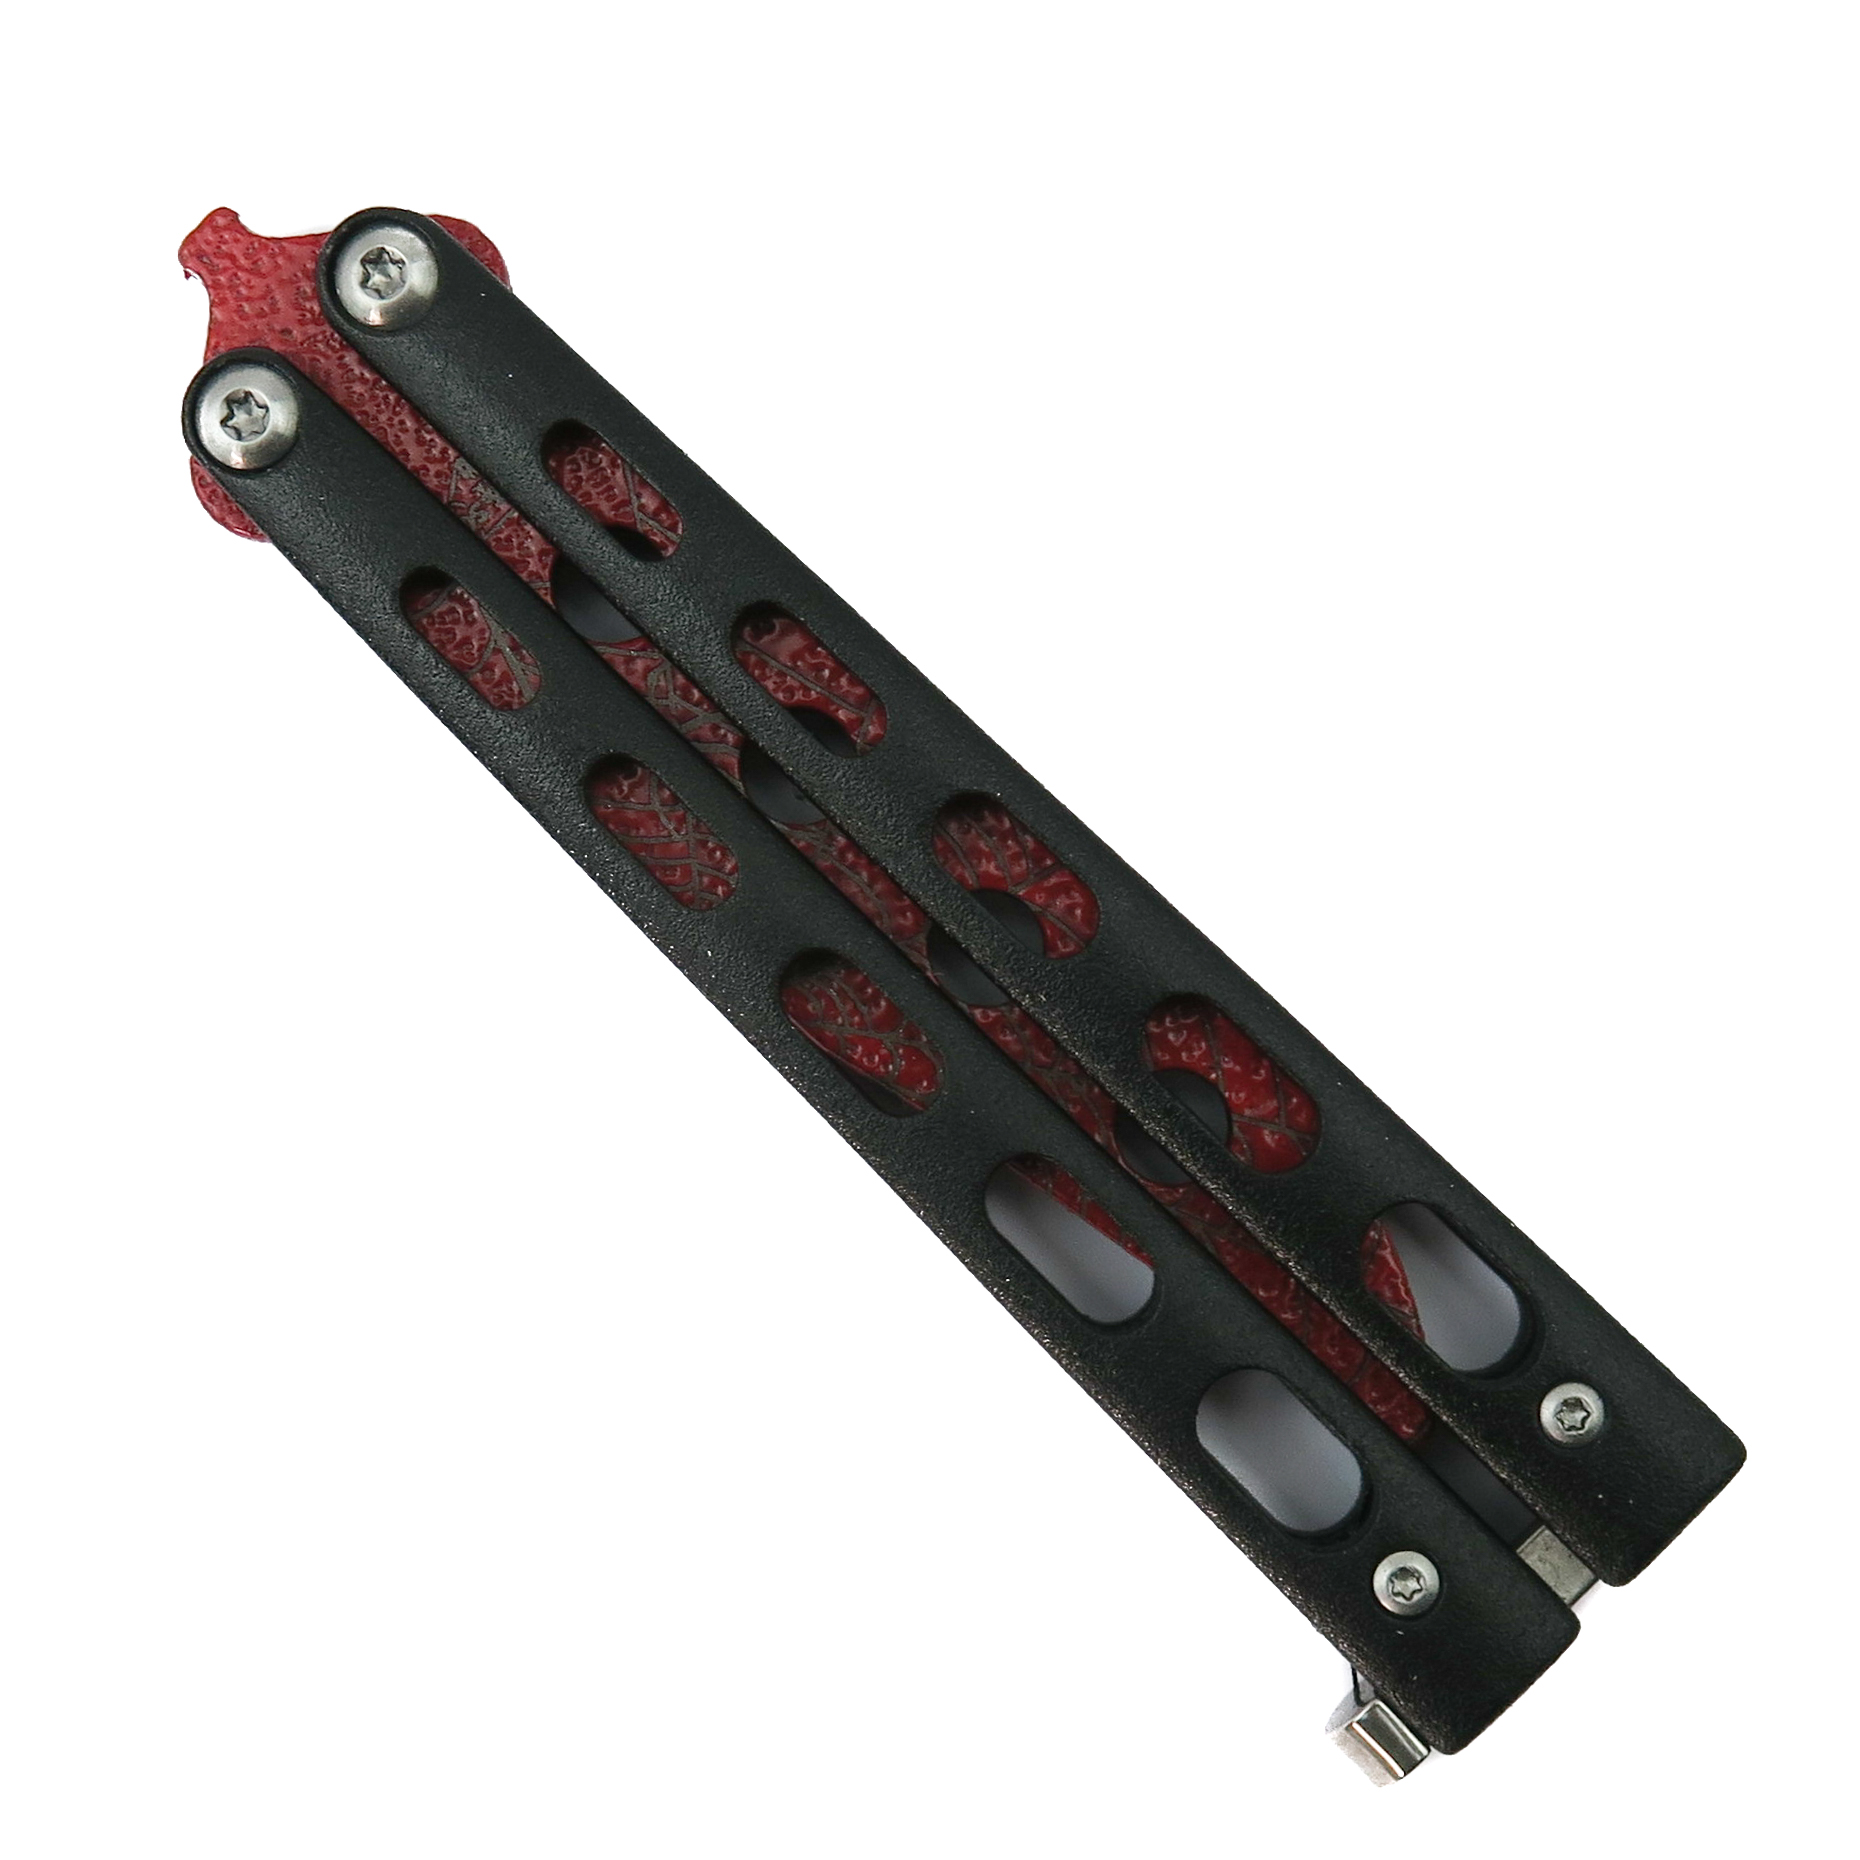 Black Slotted Butterfly Knife Stainless Steel Blade